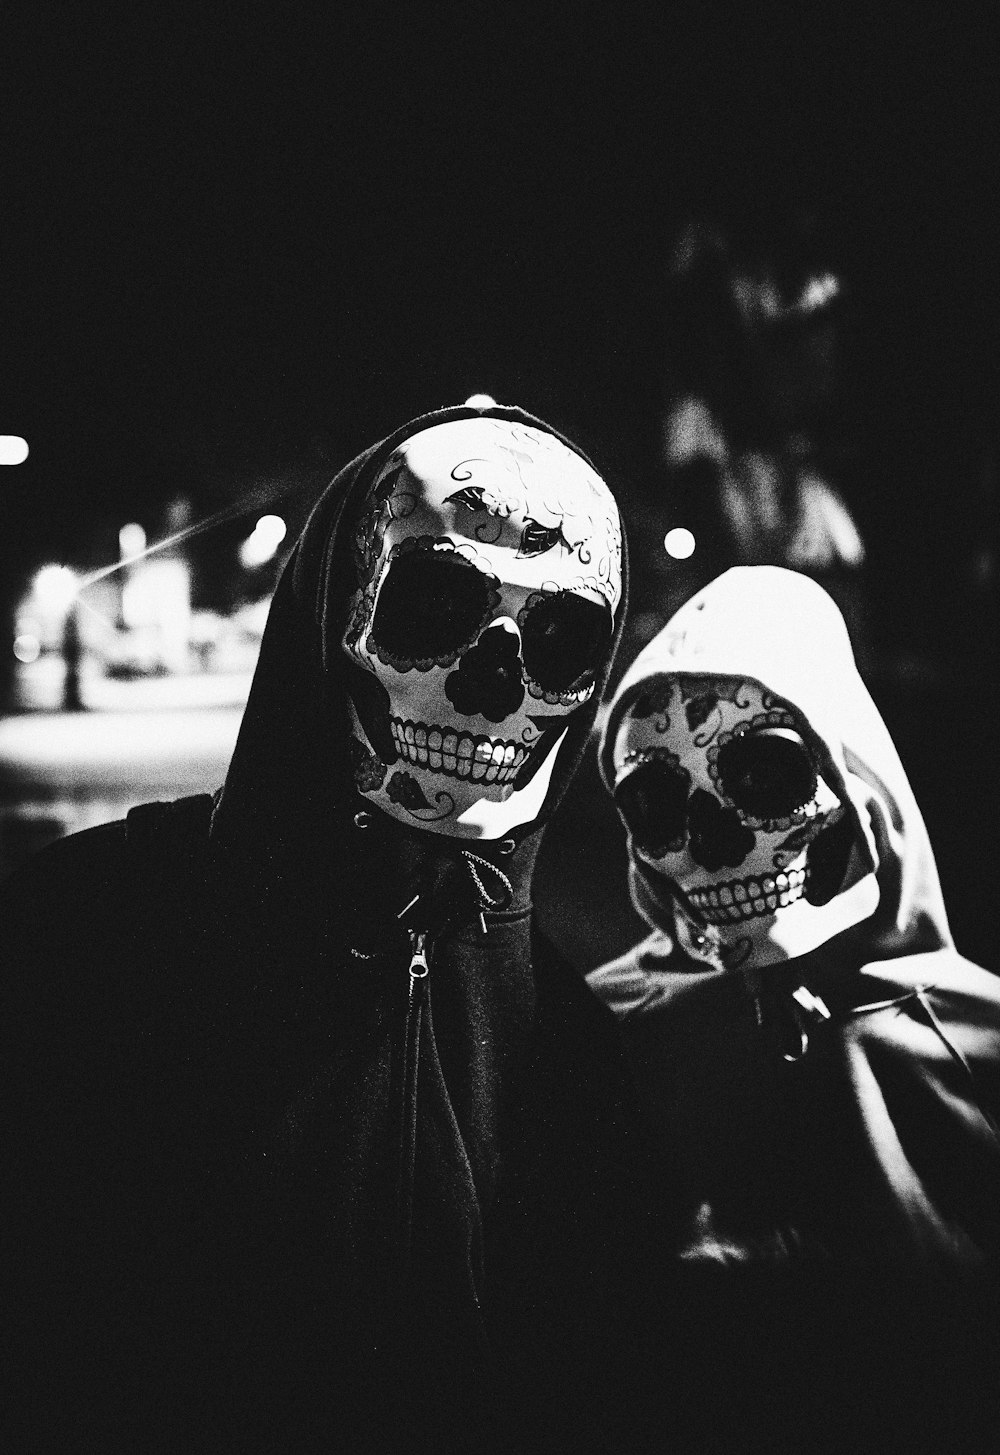 grayscale photo of two person wearing masks